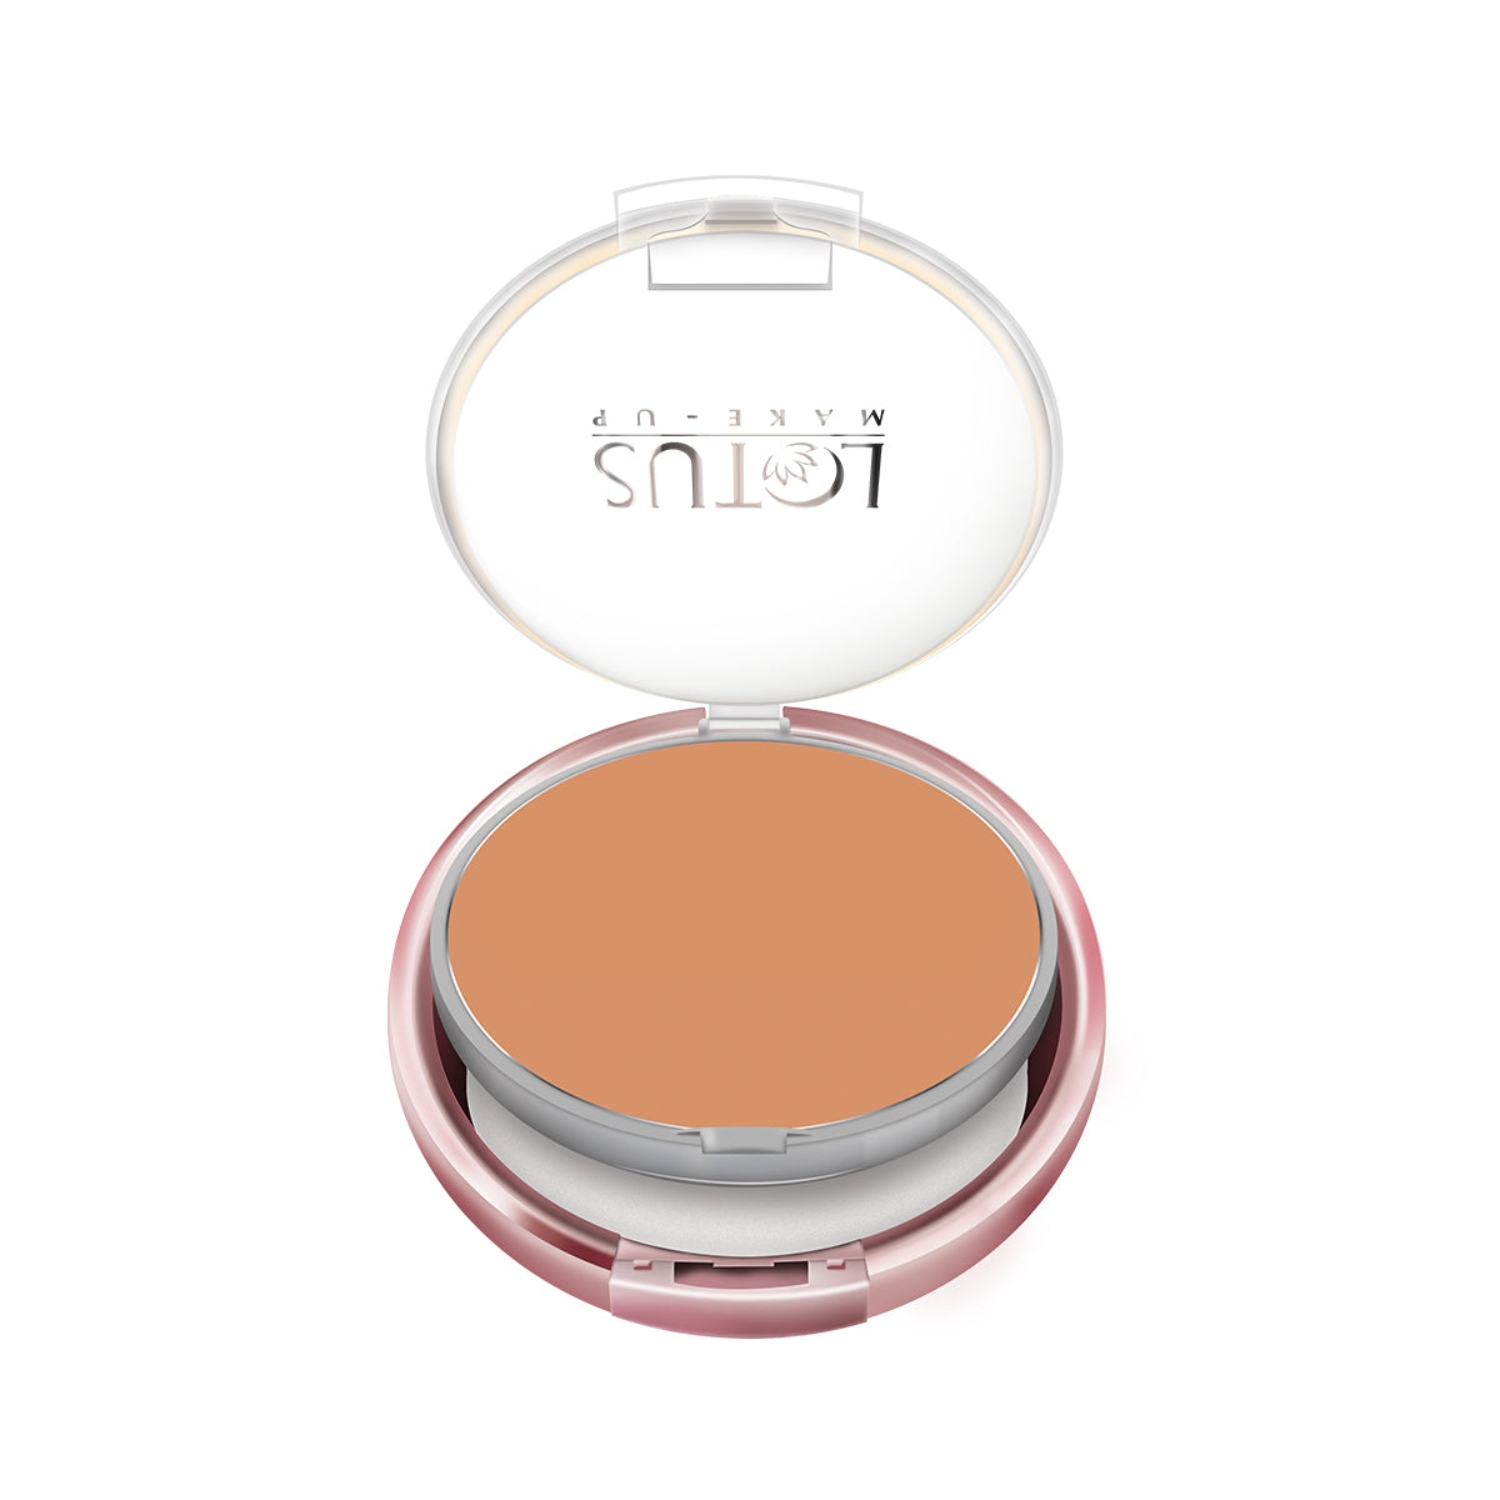 Lotus Makeup Ecostay Ib 5-In-1 Creme Compact SPF 20 - CC04 Natural Honey (10g)